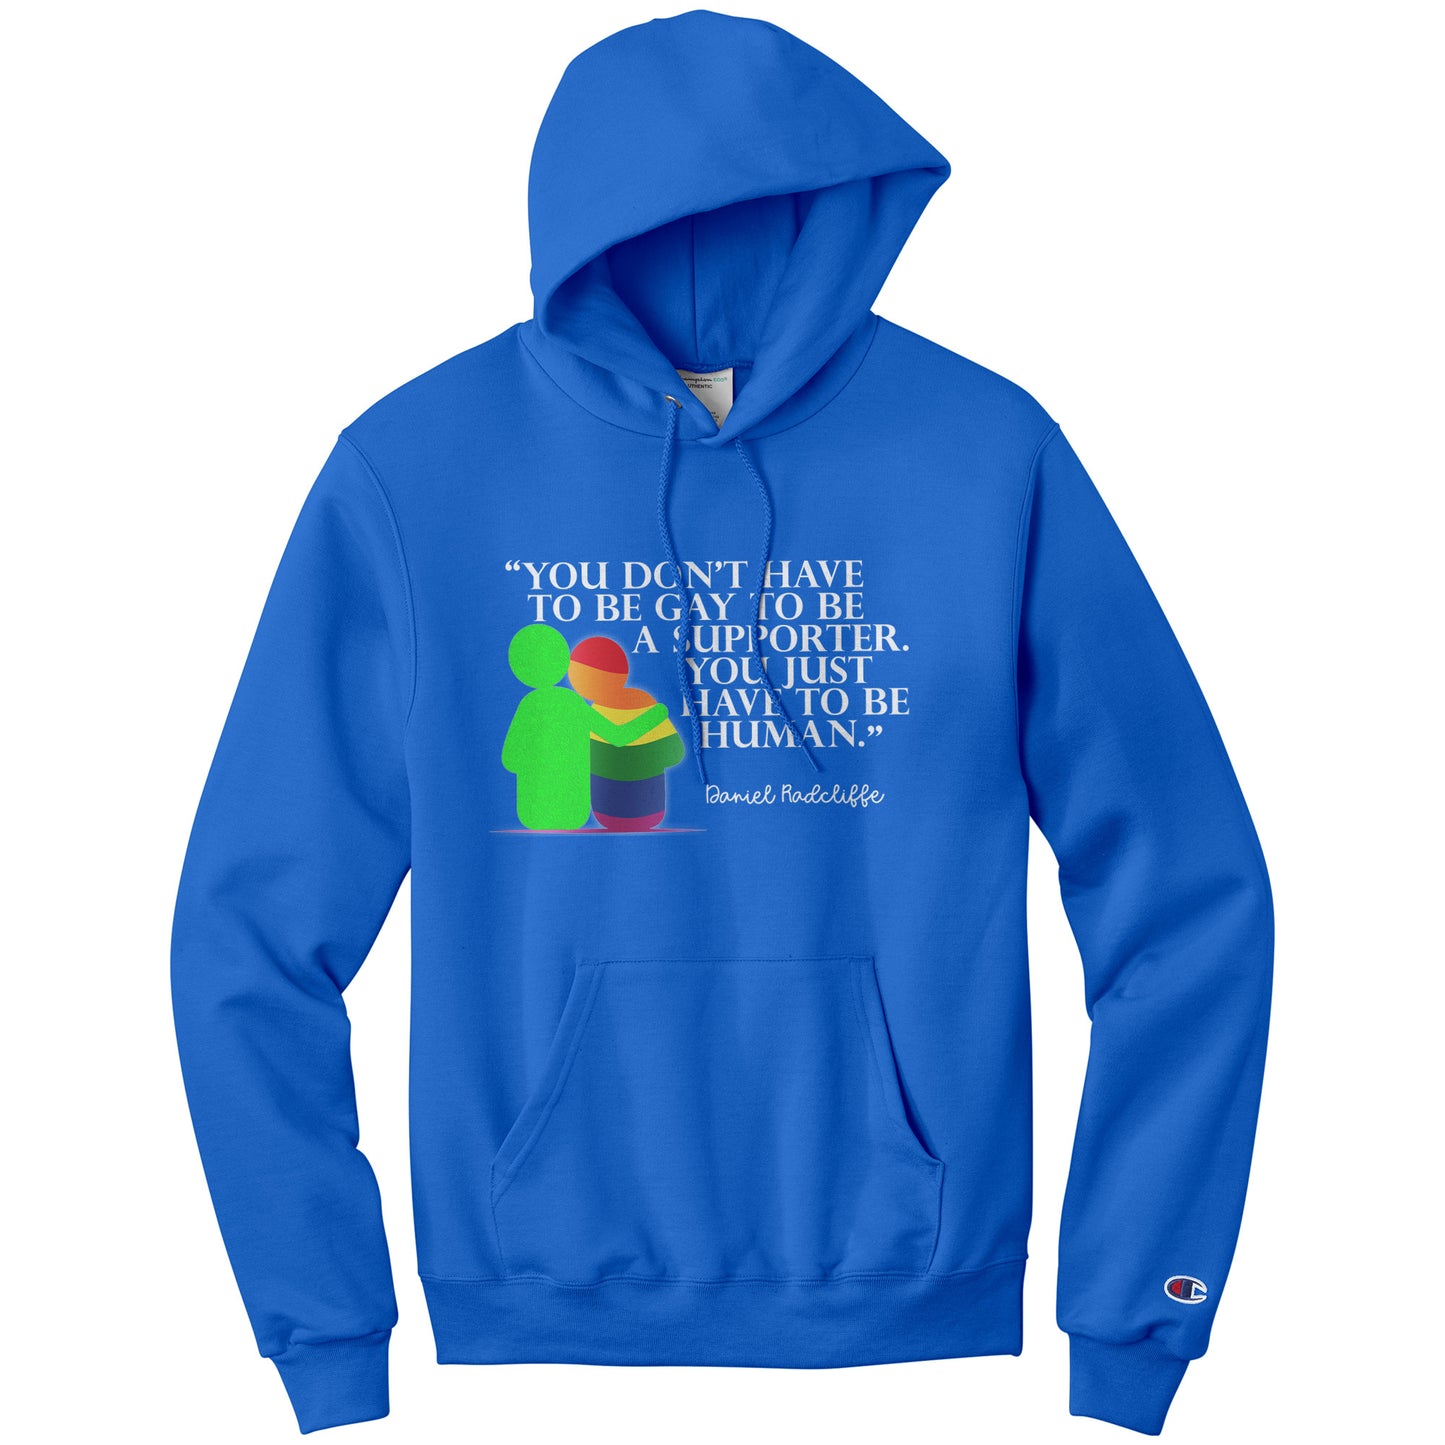 You Don't Have To Be Gay To Be A Supporter. You Just Have to be Human. T-Shirt, Hoodie, Sweatshirt